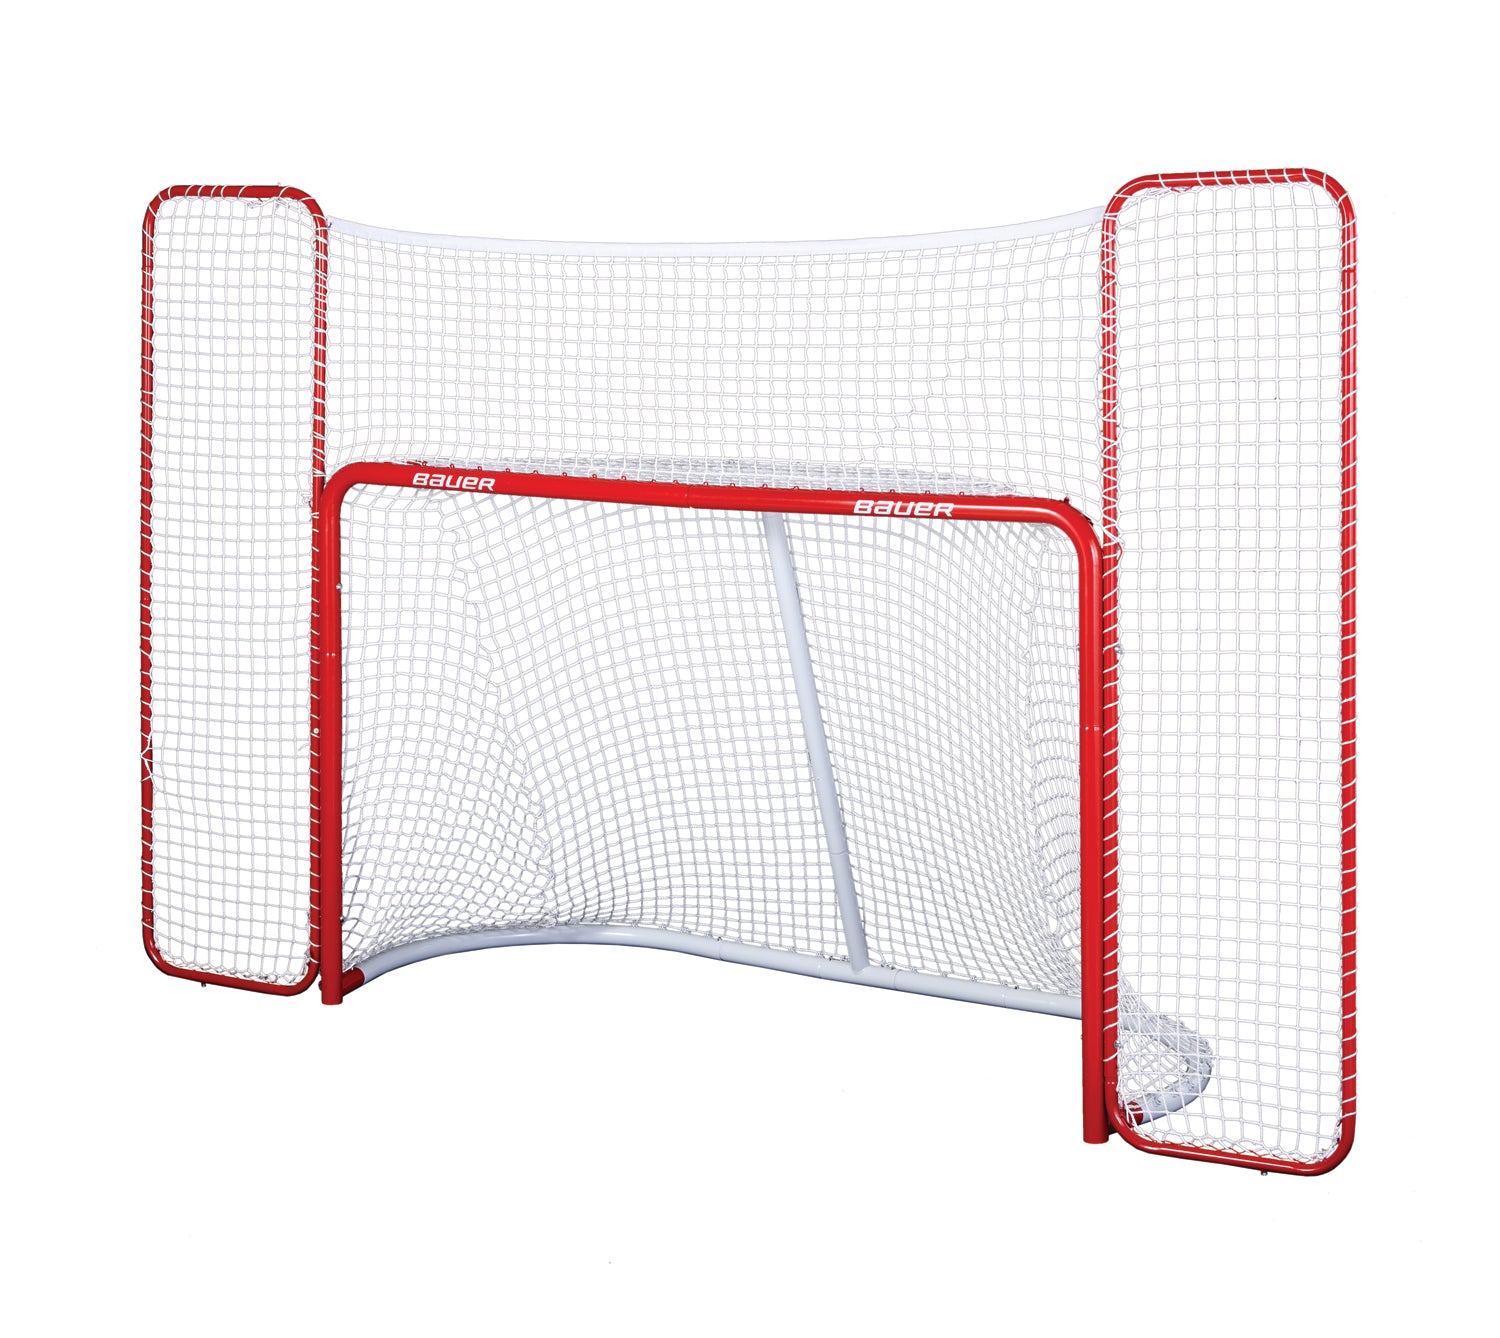 Hockey Nets For Sale Online